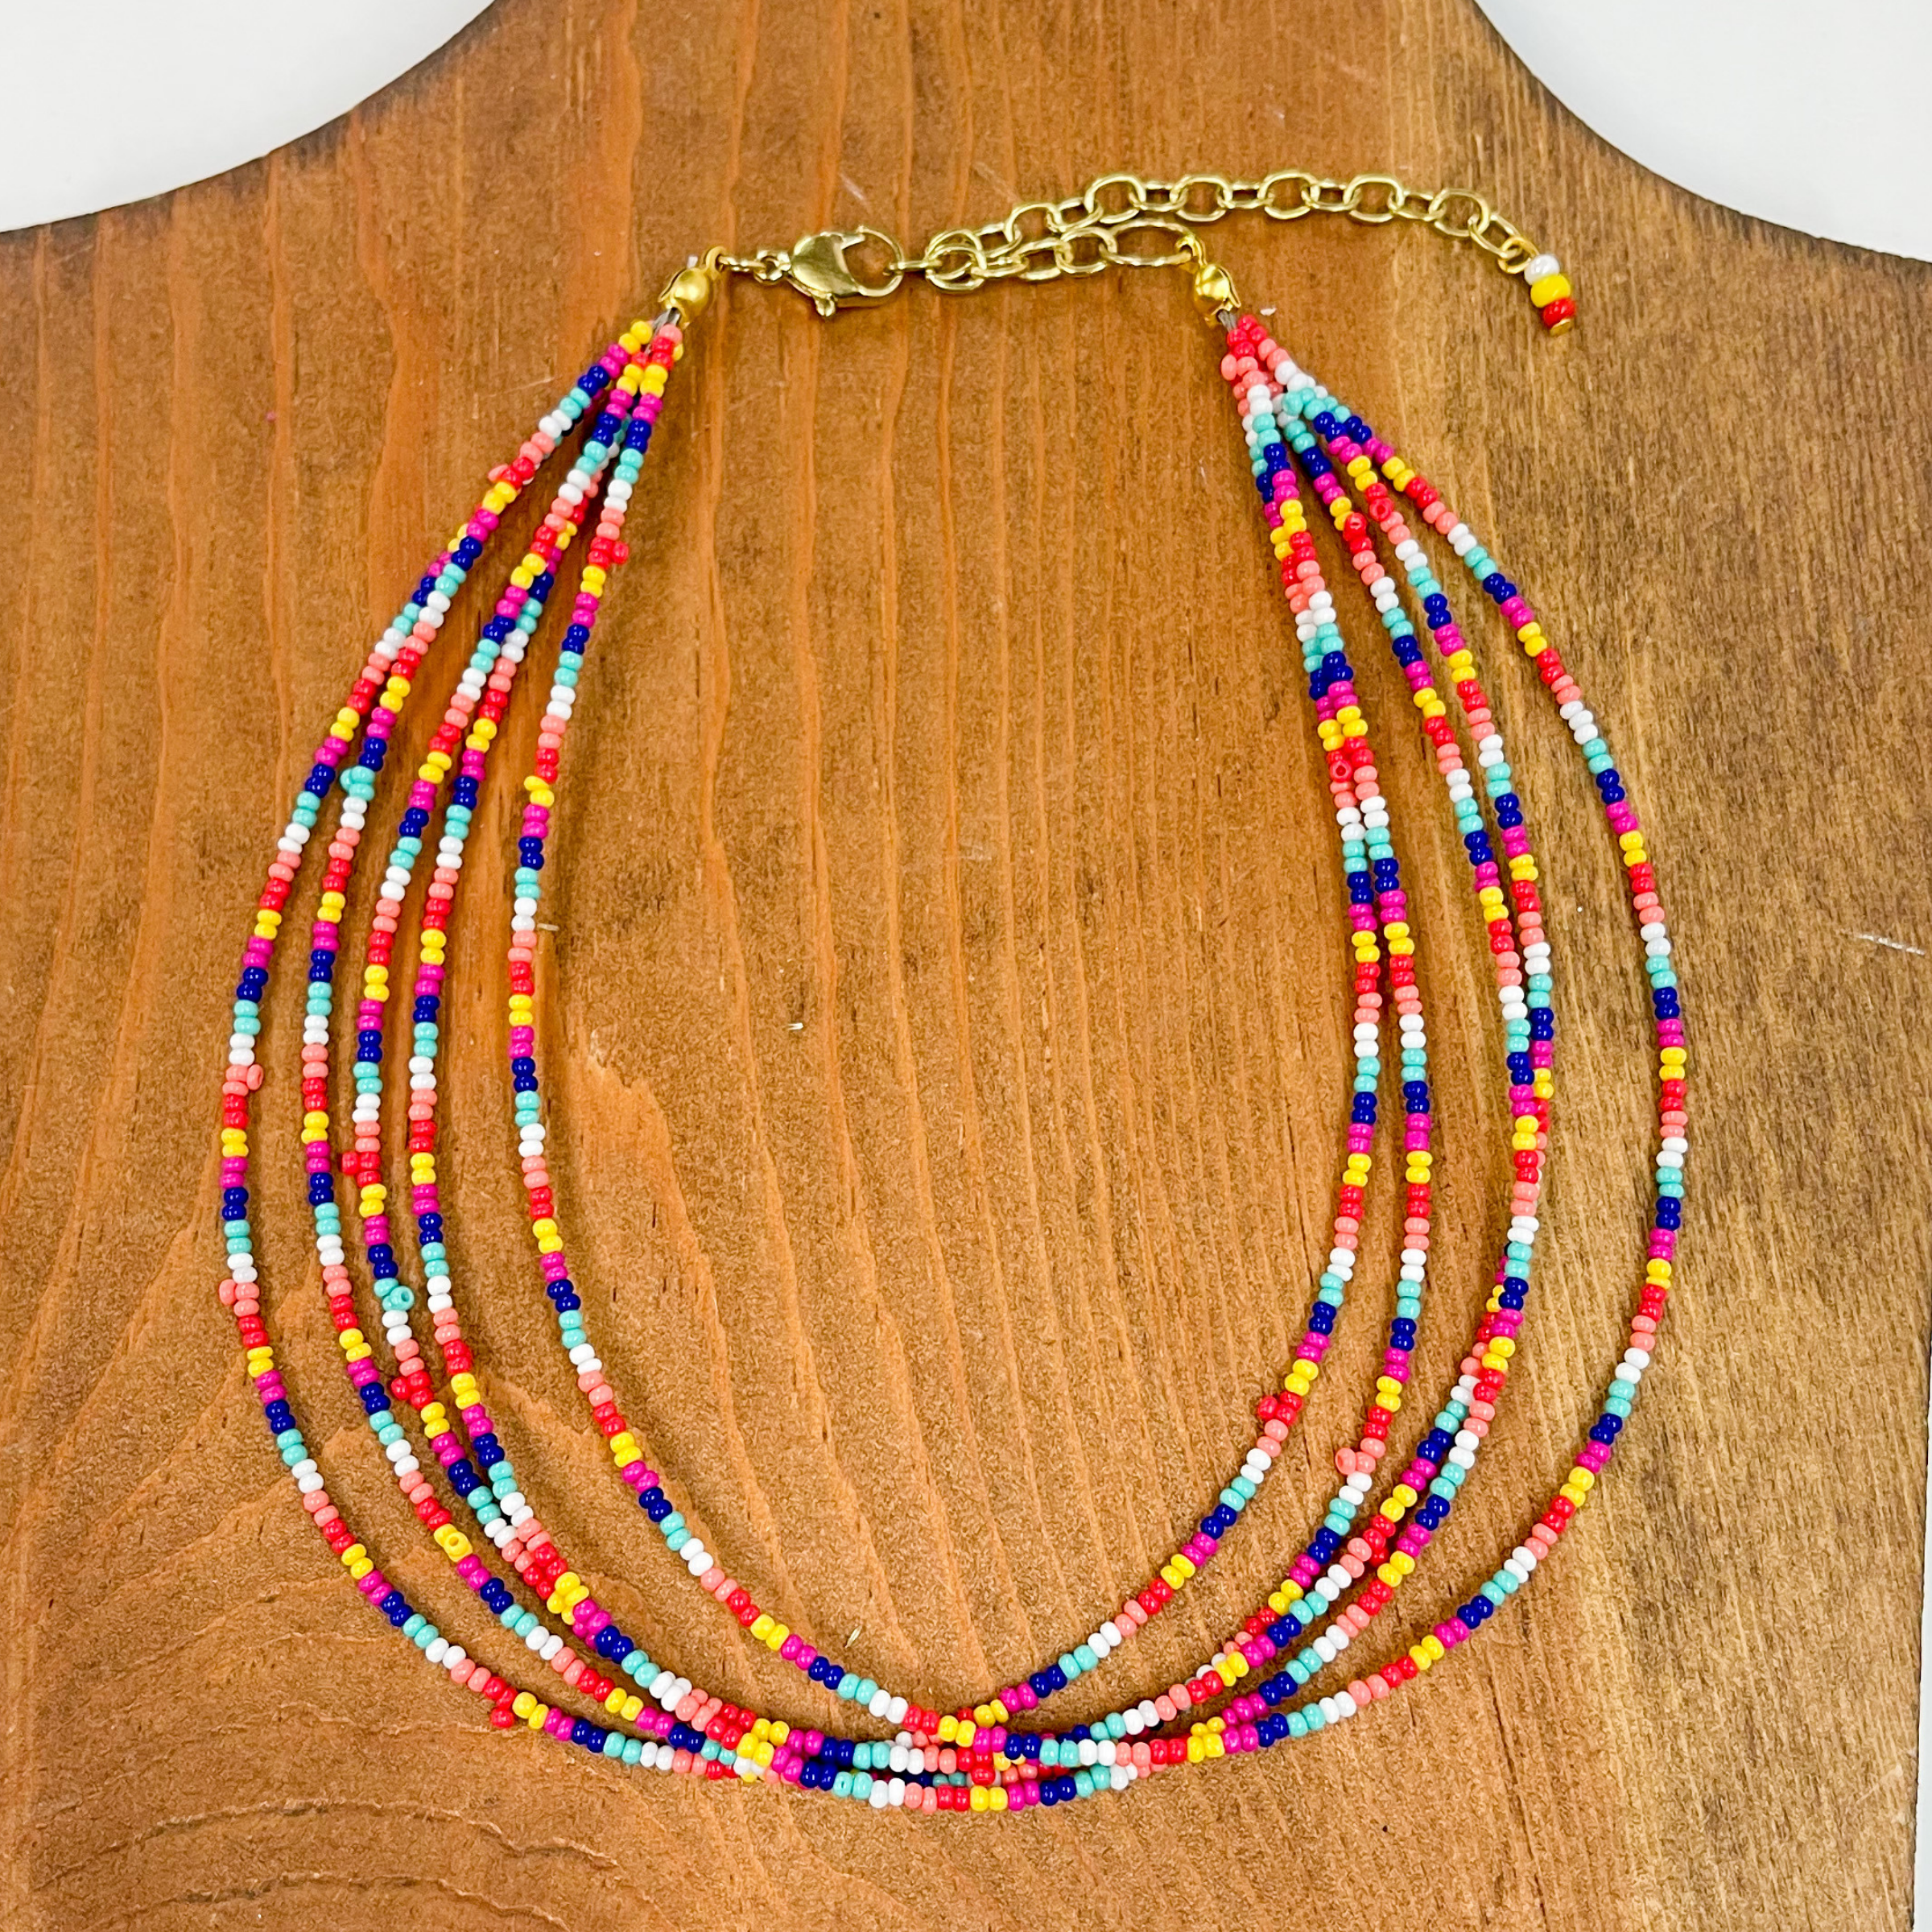 Multilayered seedbeaded choker in multicolor.  The multicolored beads come in white, coral,  orange, red, yellow, dark blue, turquoise, and hot  pink. The adjustable  chain has three beads in colors, white, yellow, and  red. These earrings are taken on a brown block.